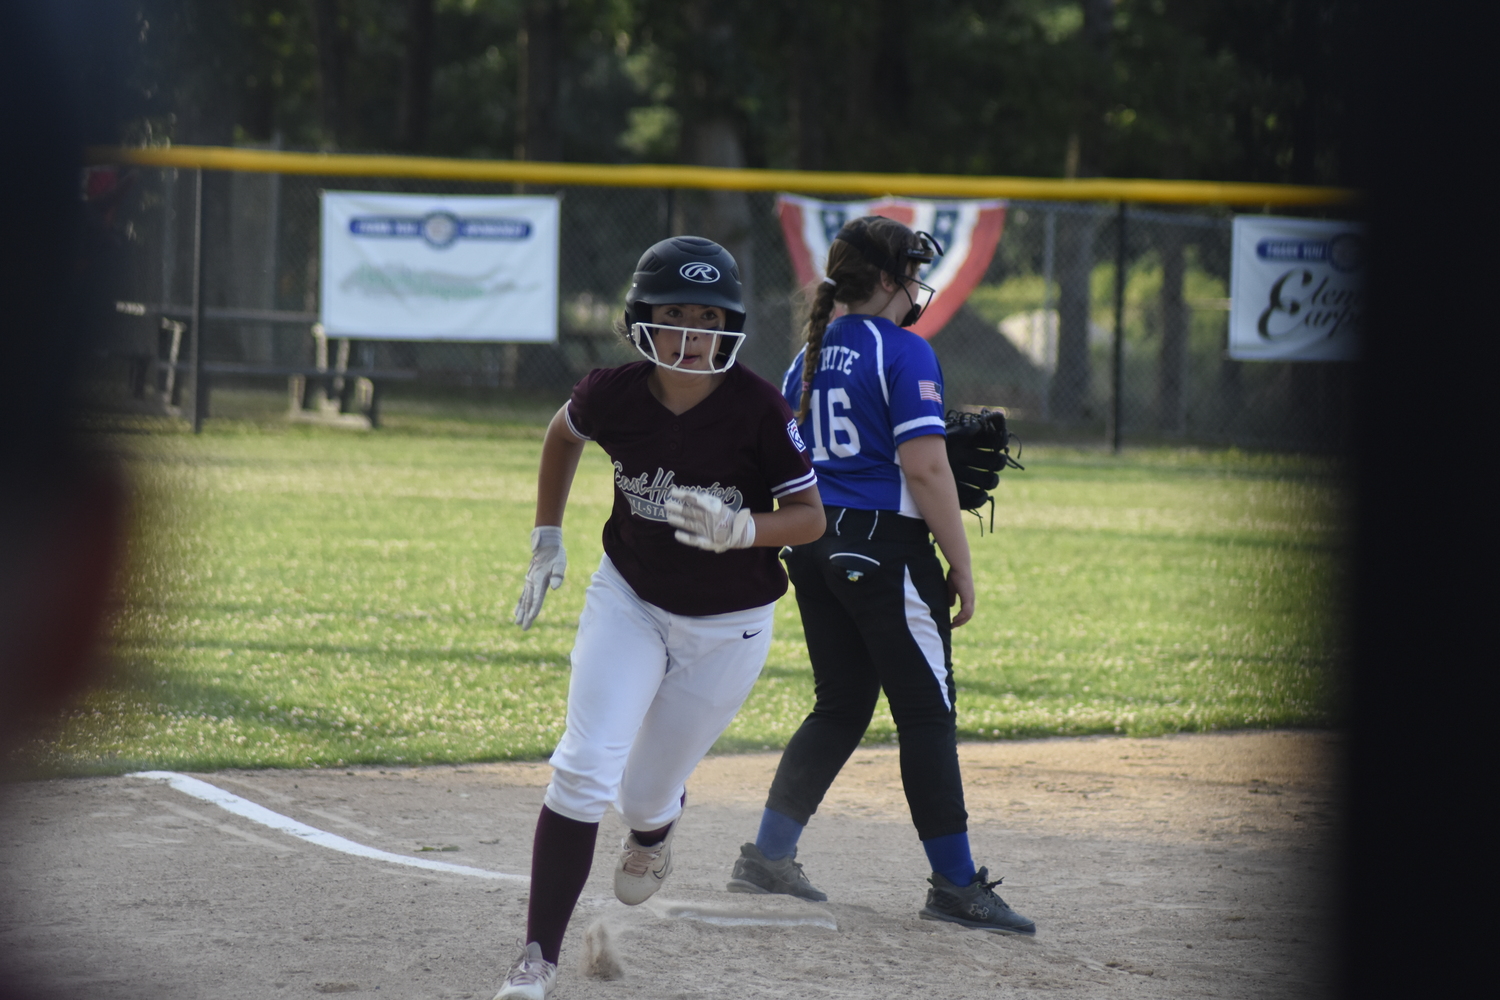 Kenzie O'Connell rounds third base and heads home on Novella Dunham's double to center field.  DREW BUDD